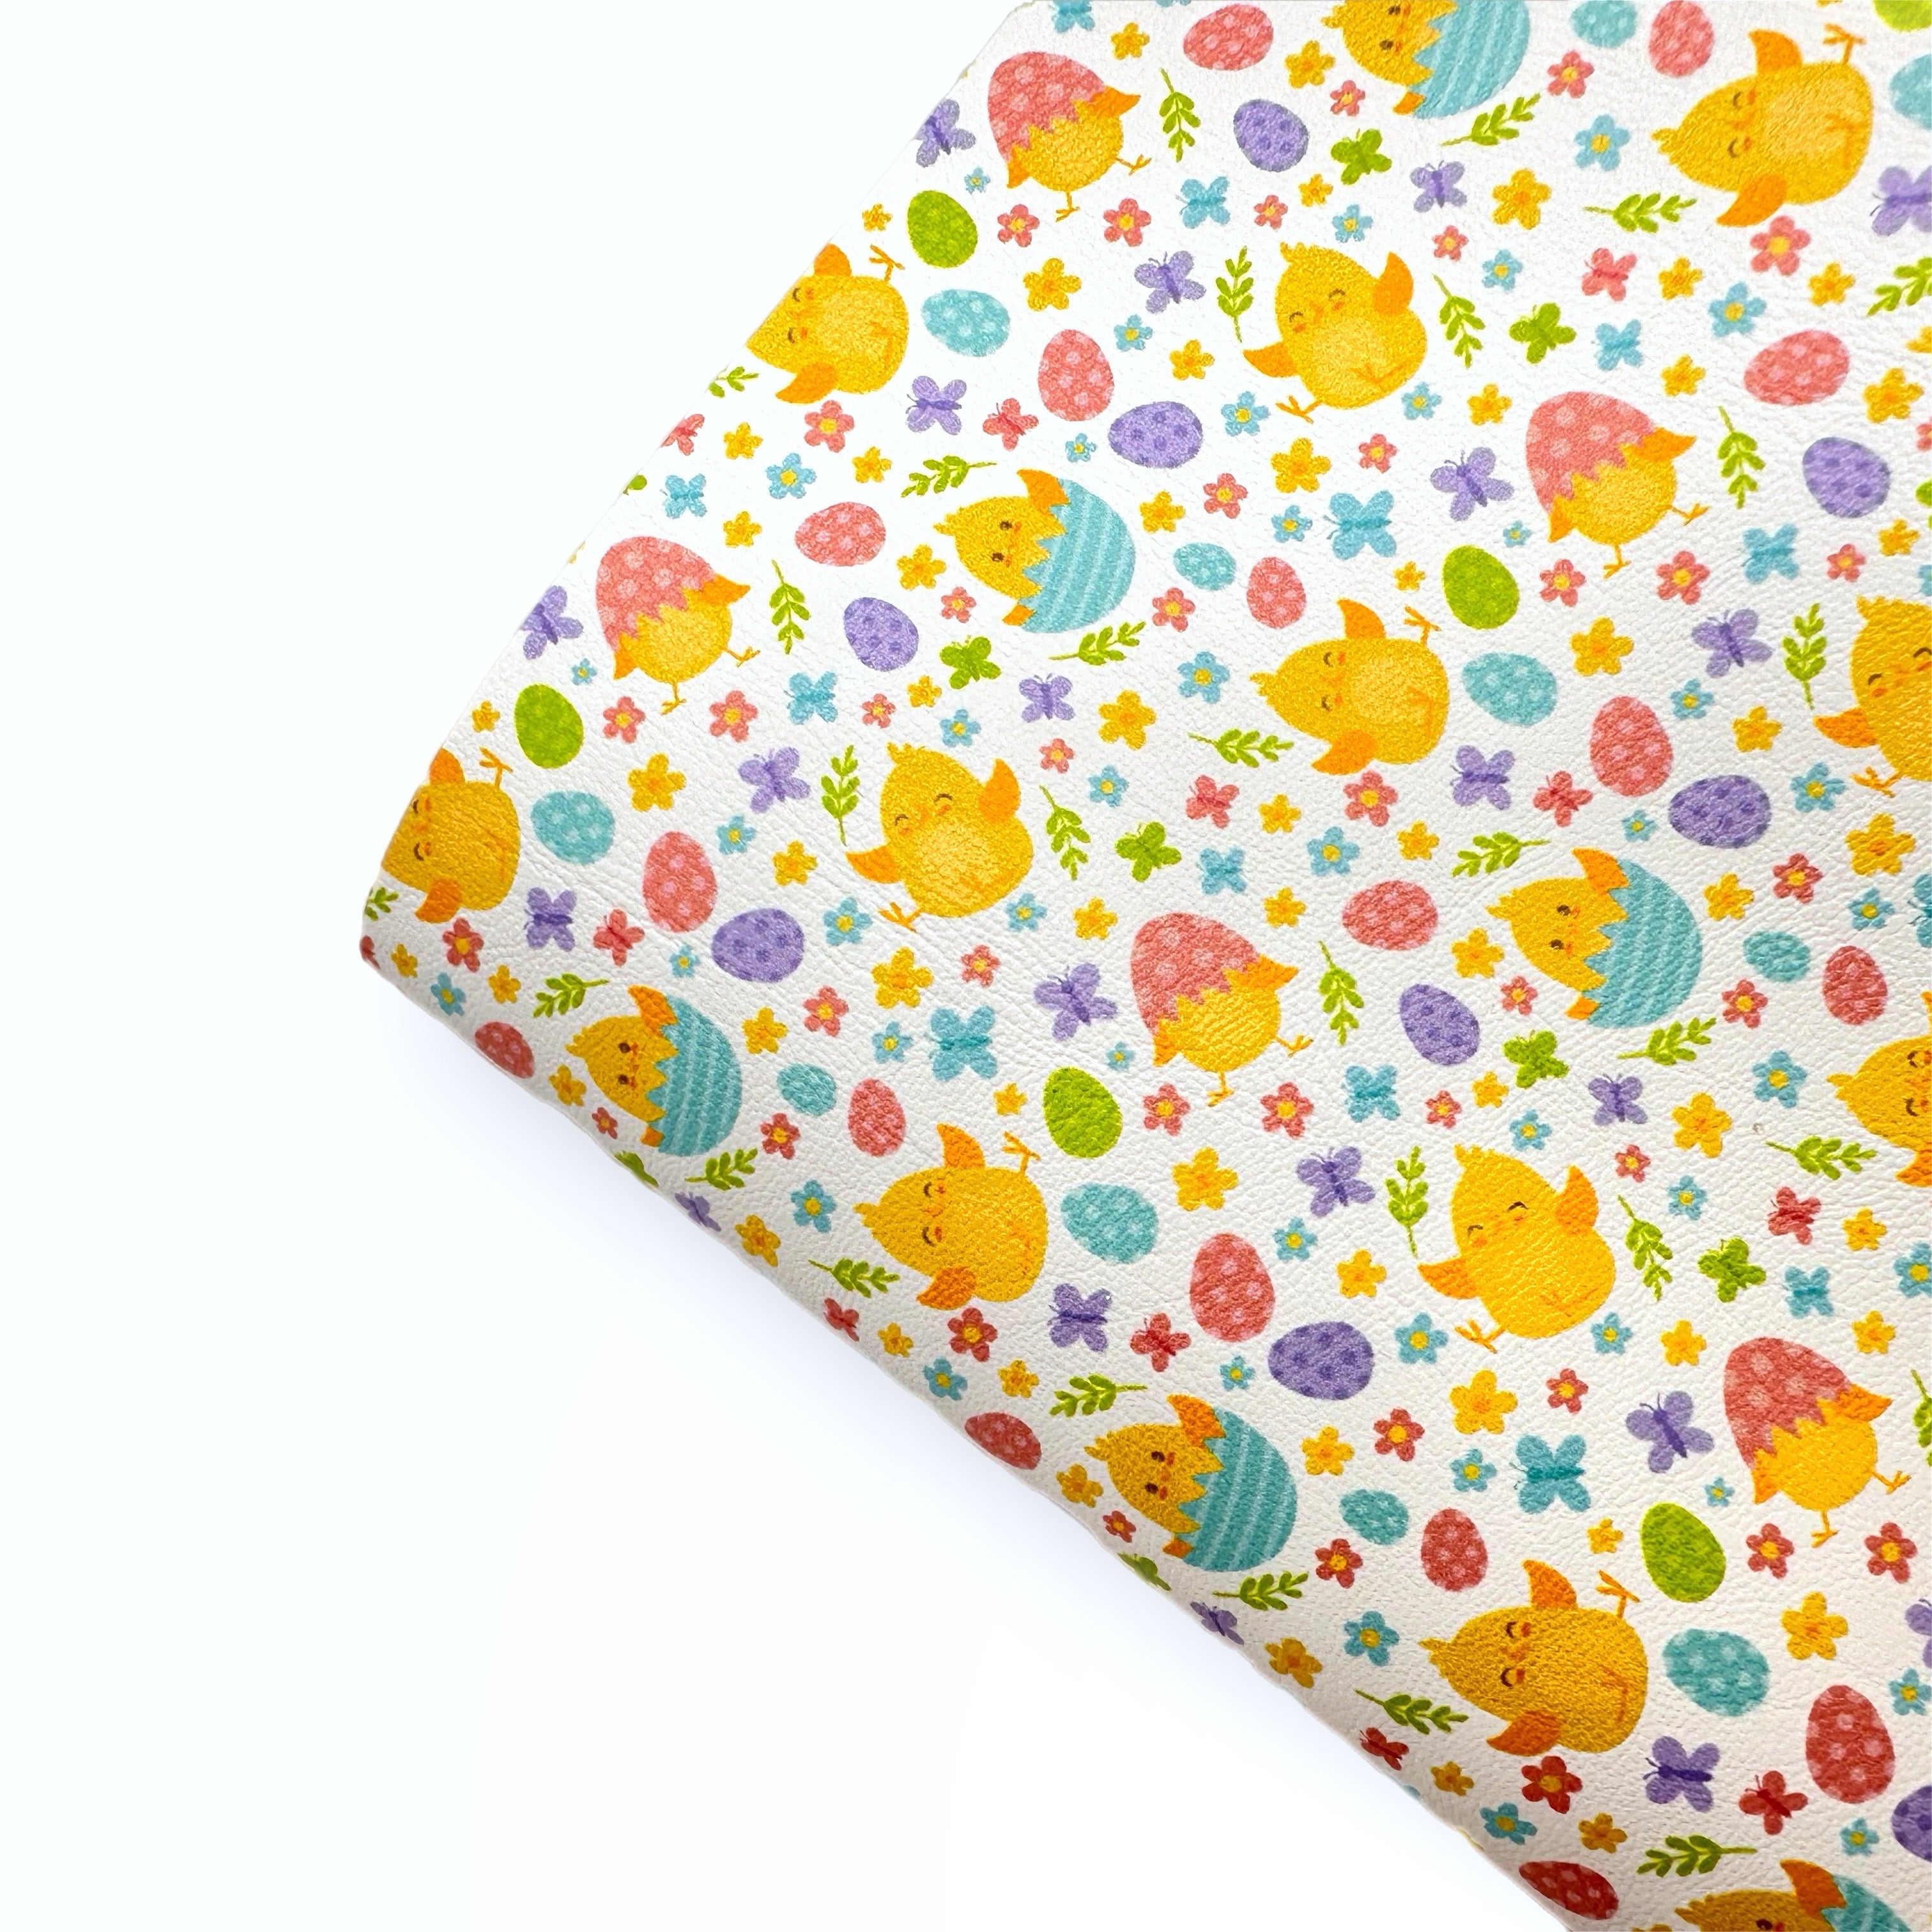 Ickle Baby Chicks Premium Faux Leather Fabric